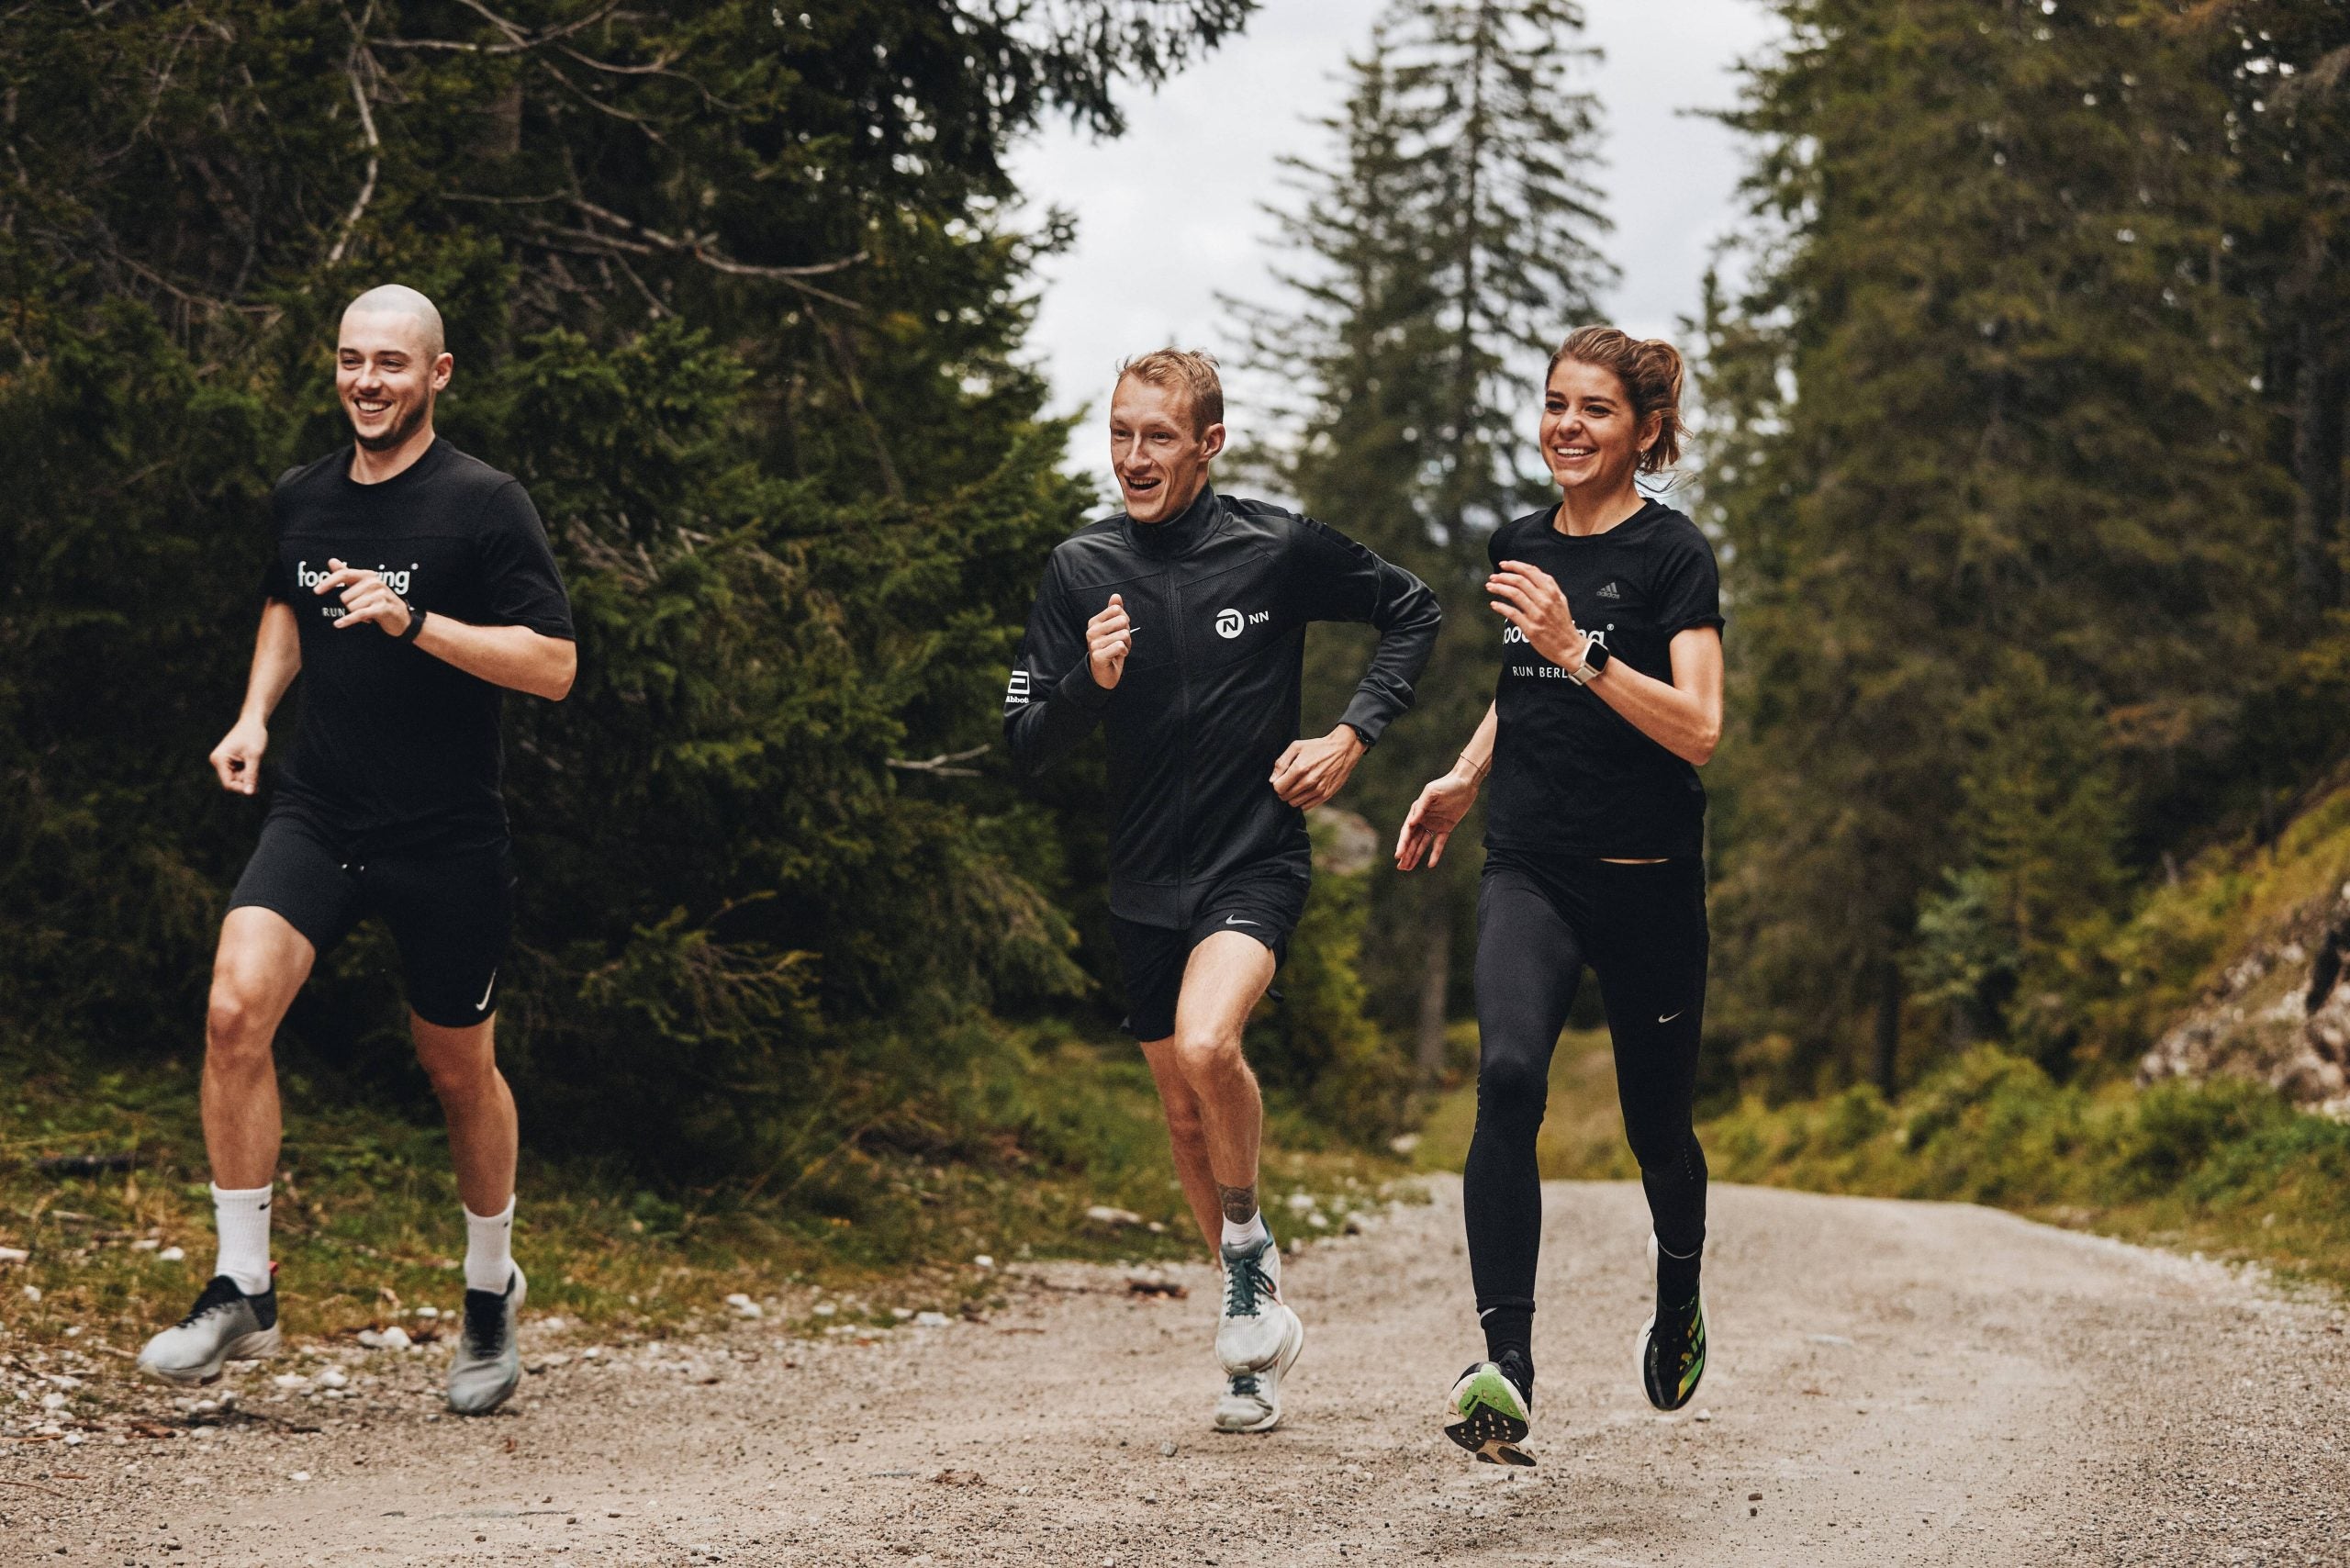 three runners on a wooded trail wearing black athletic clothing. Björn Koreman is in the center.